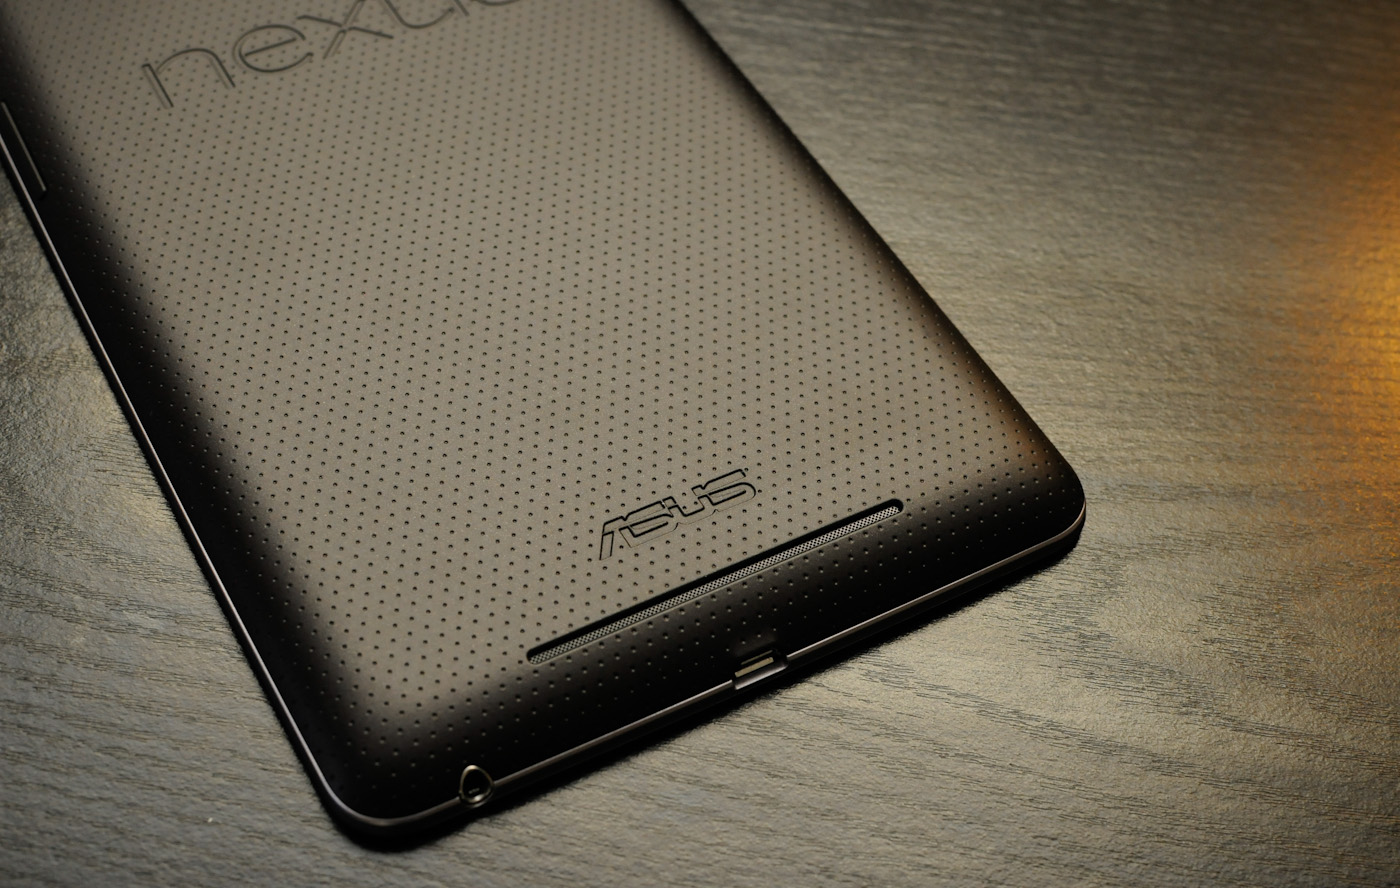 Google Nexus 7 and Android 4.1 - Mini Review